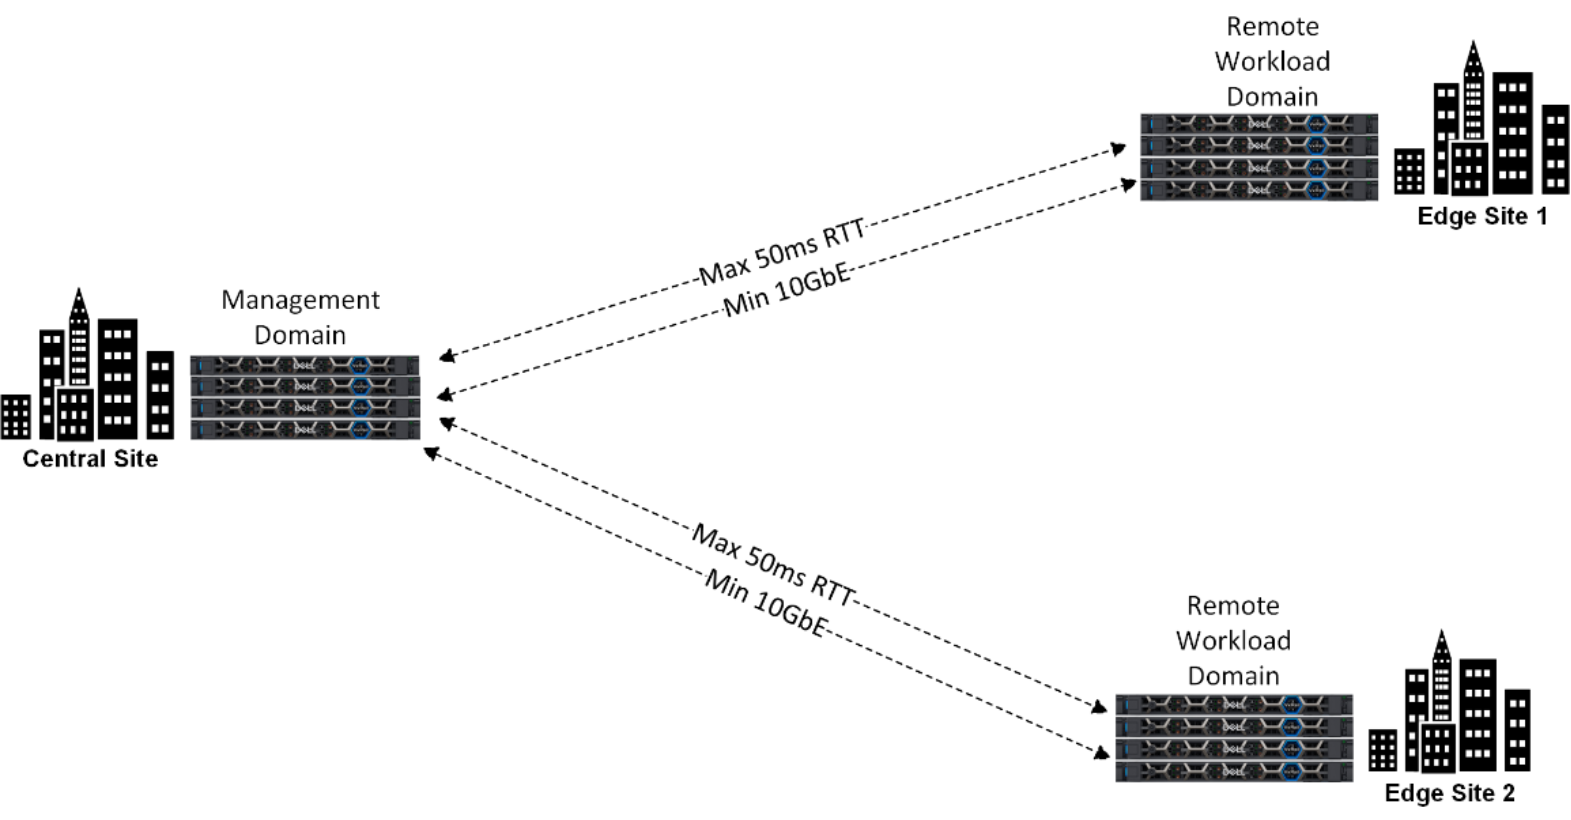 This figure shows WAN requirements for a remote workload domain.